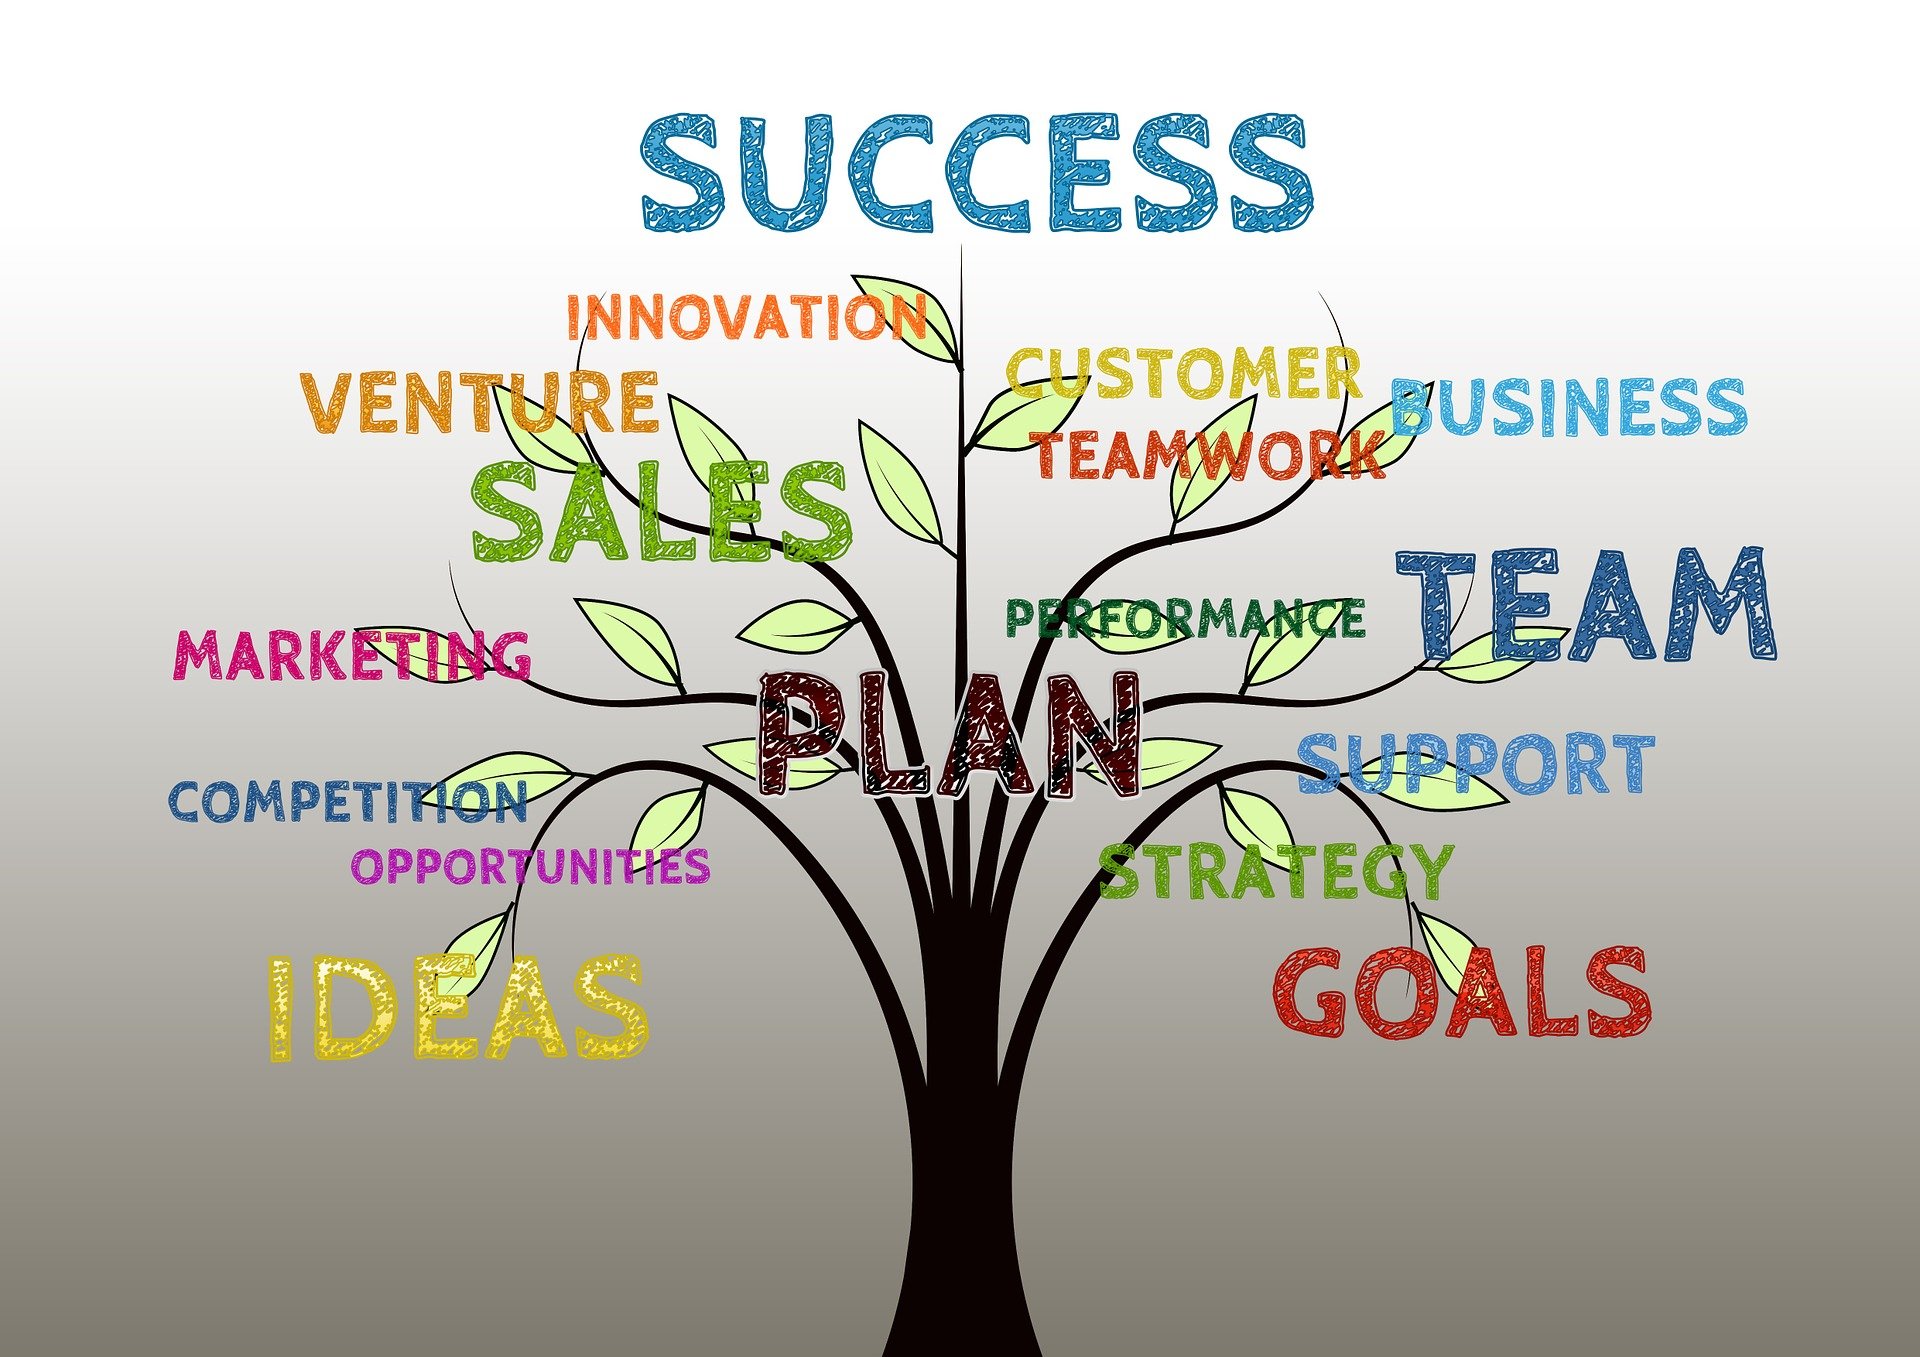 8 Ways to Build a Successful Sales Team